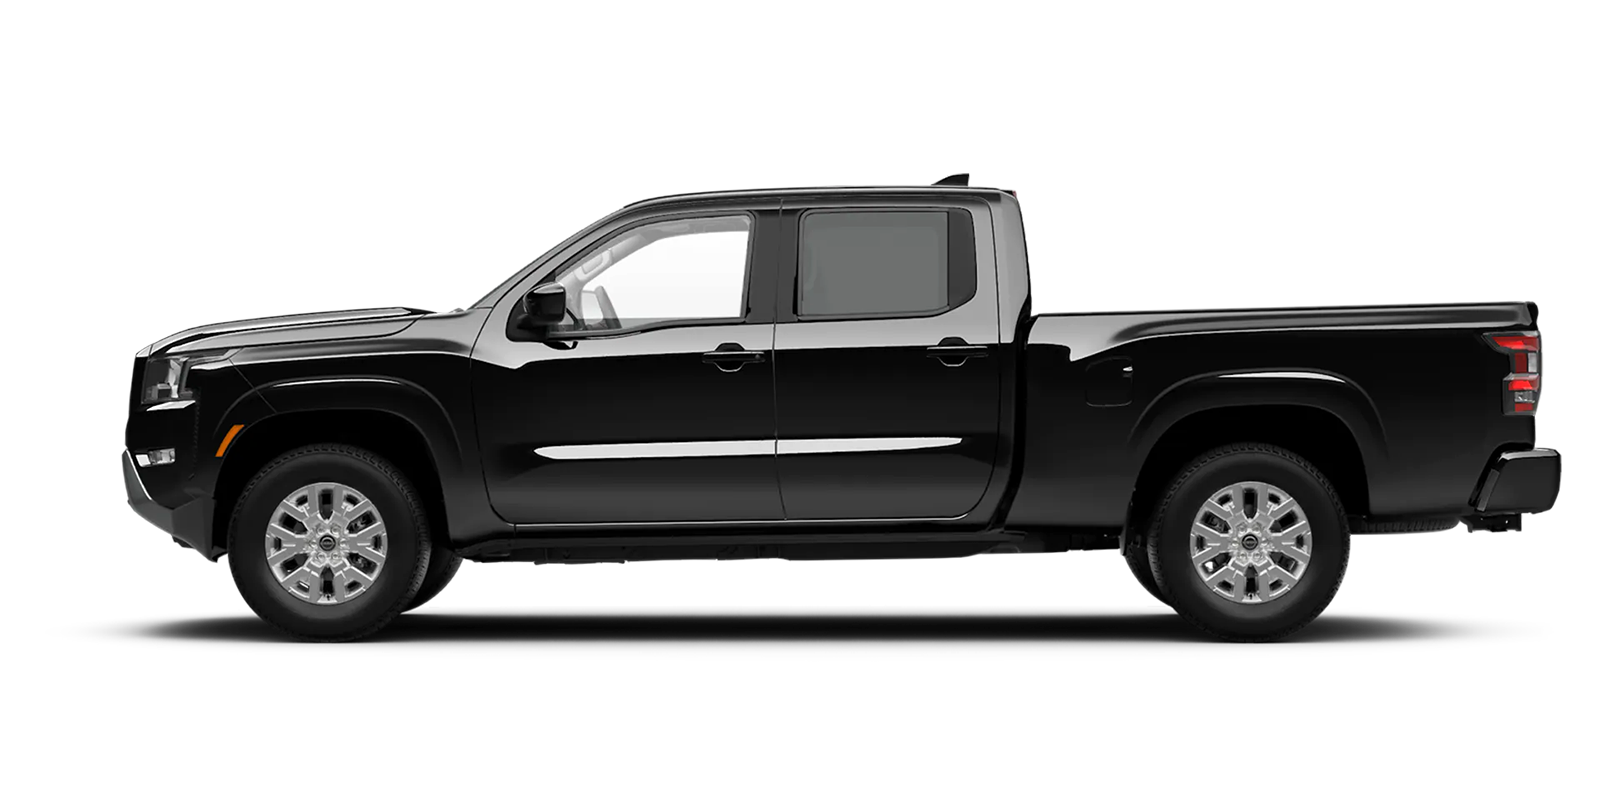 2022 Frontier Crew Cab Long Bed SV 4x2 in Super Black | Nissan City of Springfield in Springfield NJ